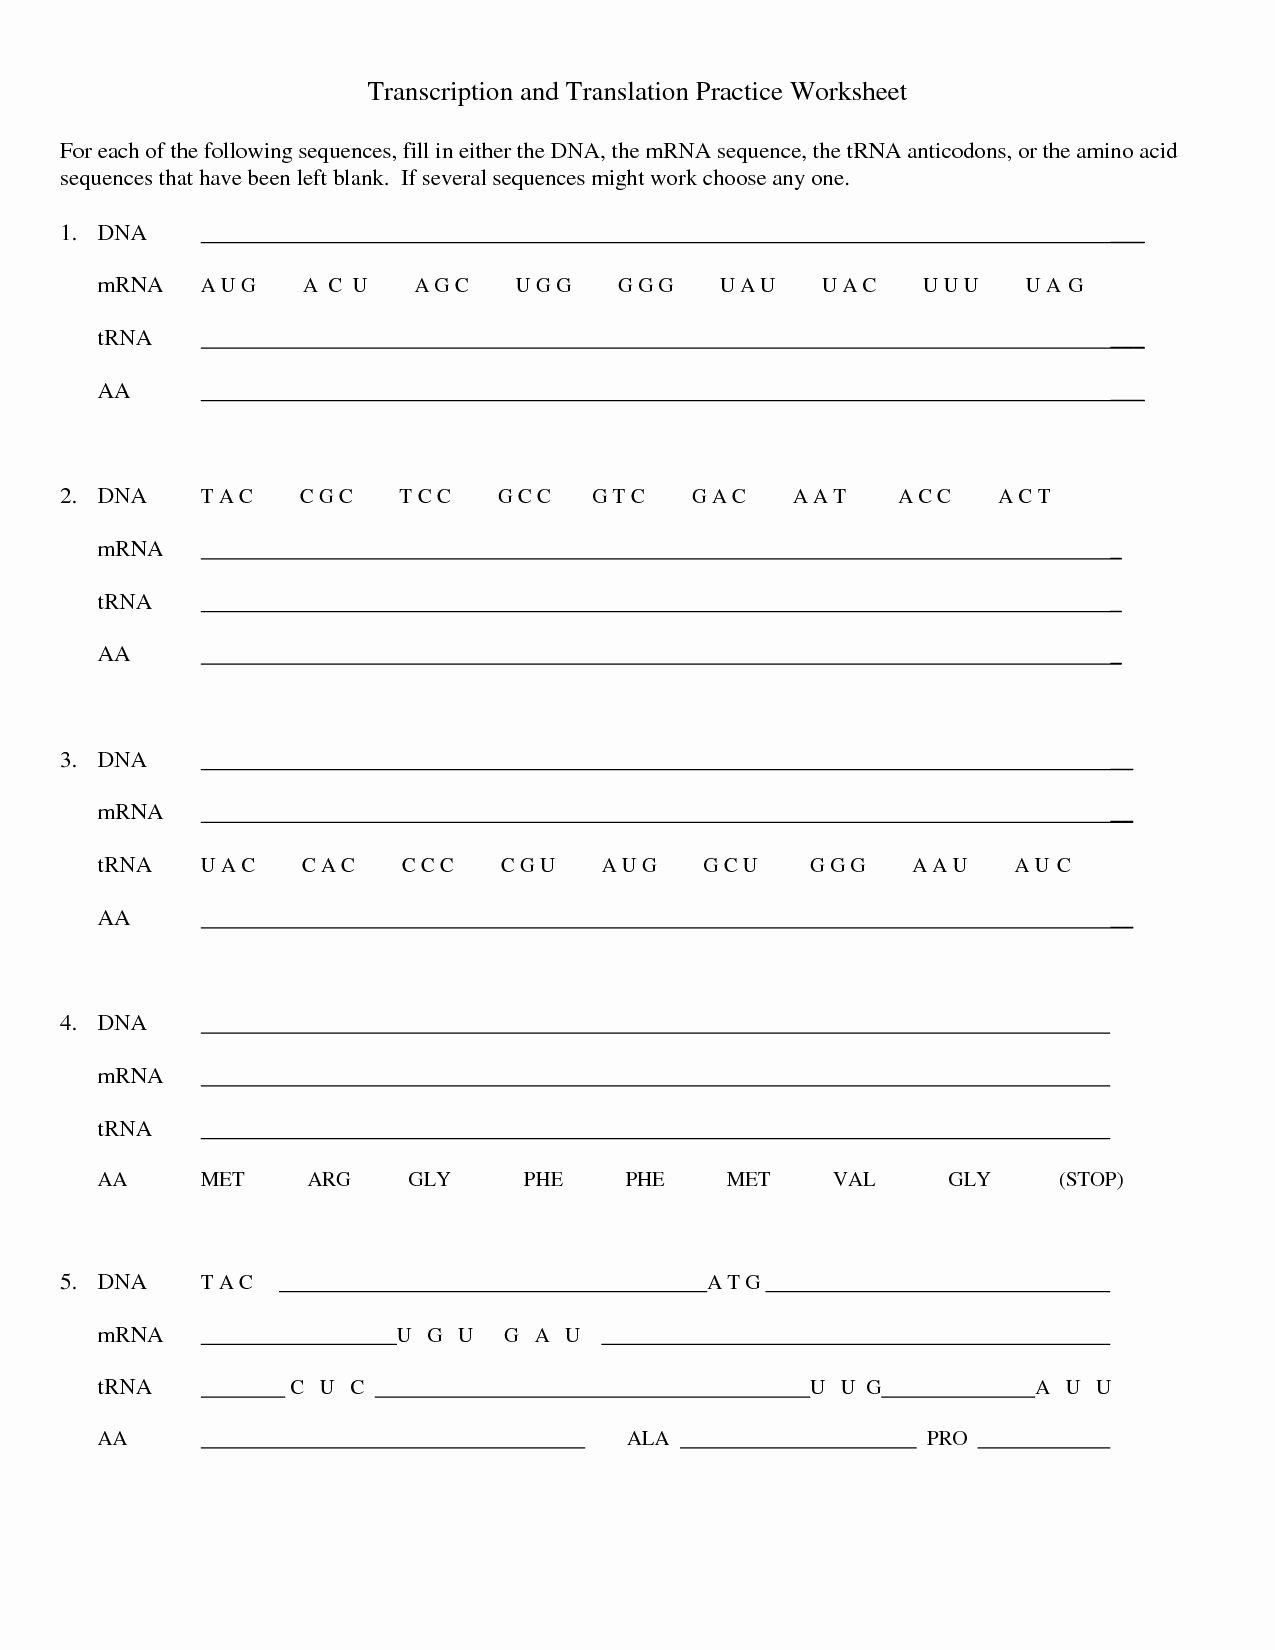 Dna and Replication Worksheet Answers Lovely Dna Replication and Transcription Worksheet Answers